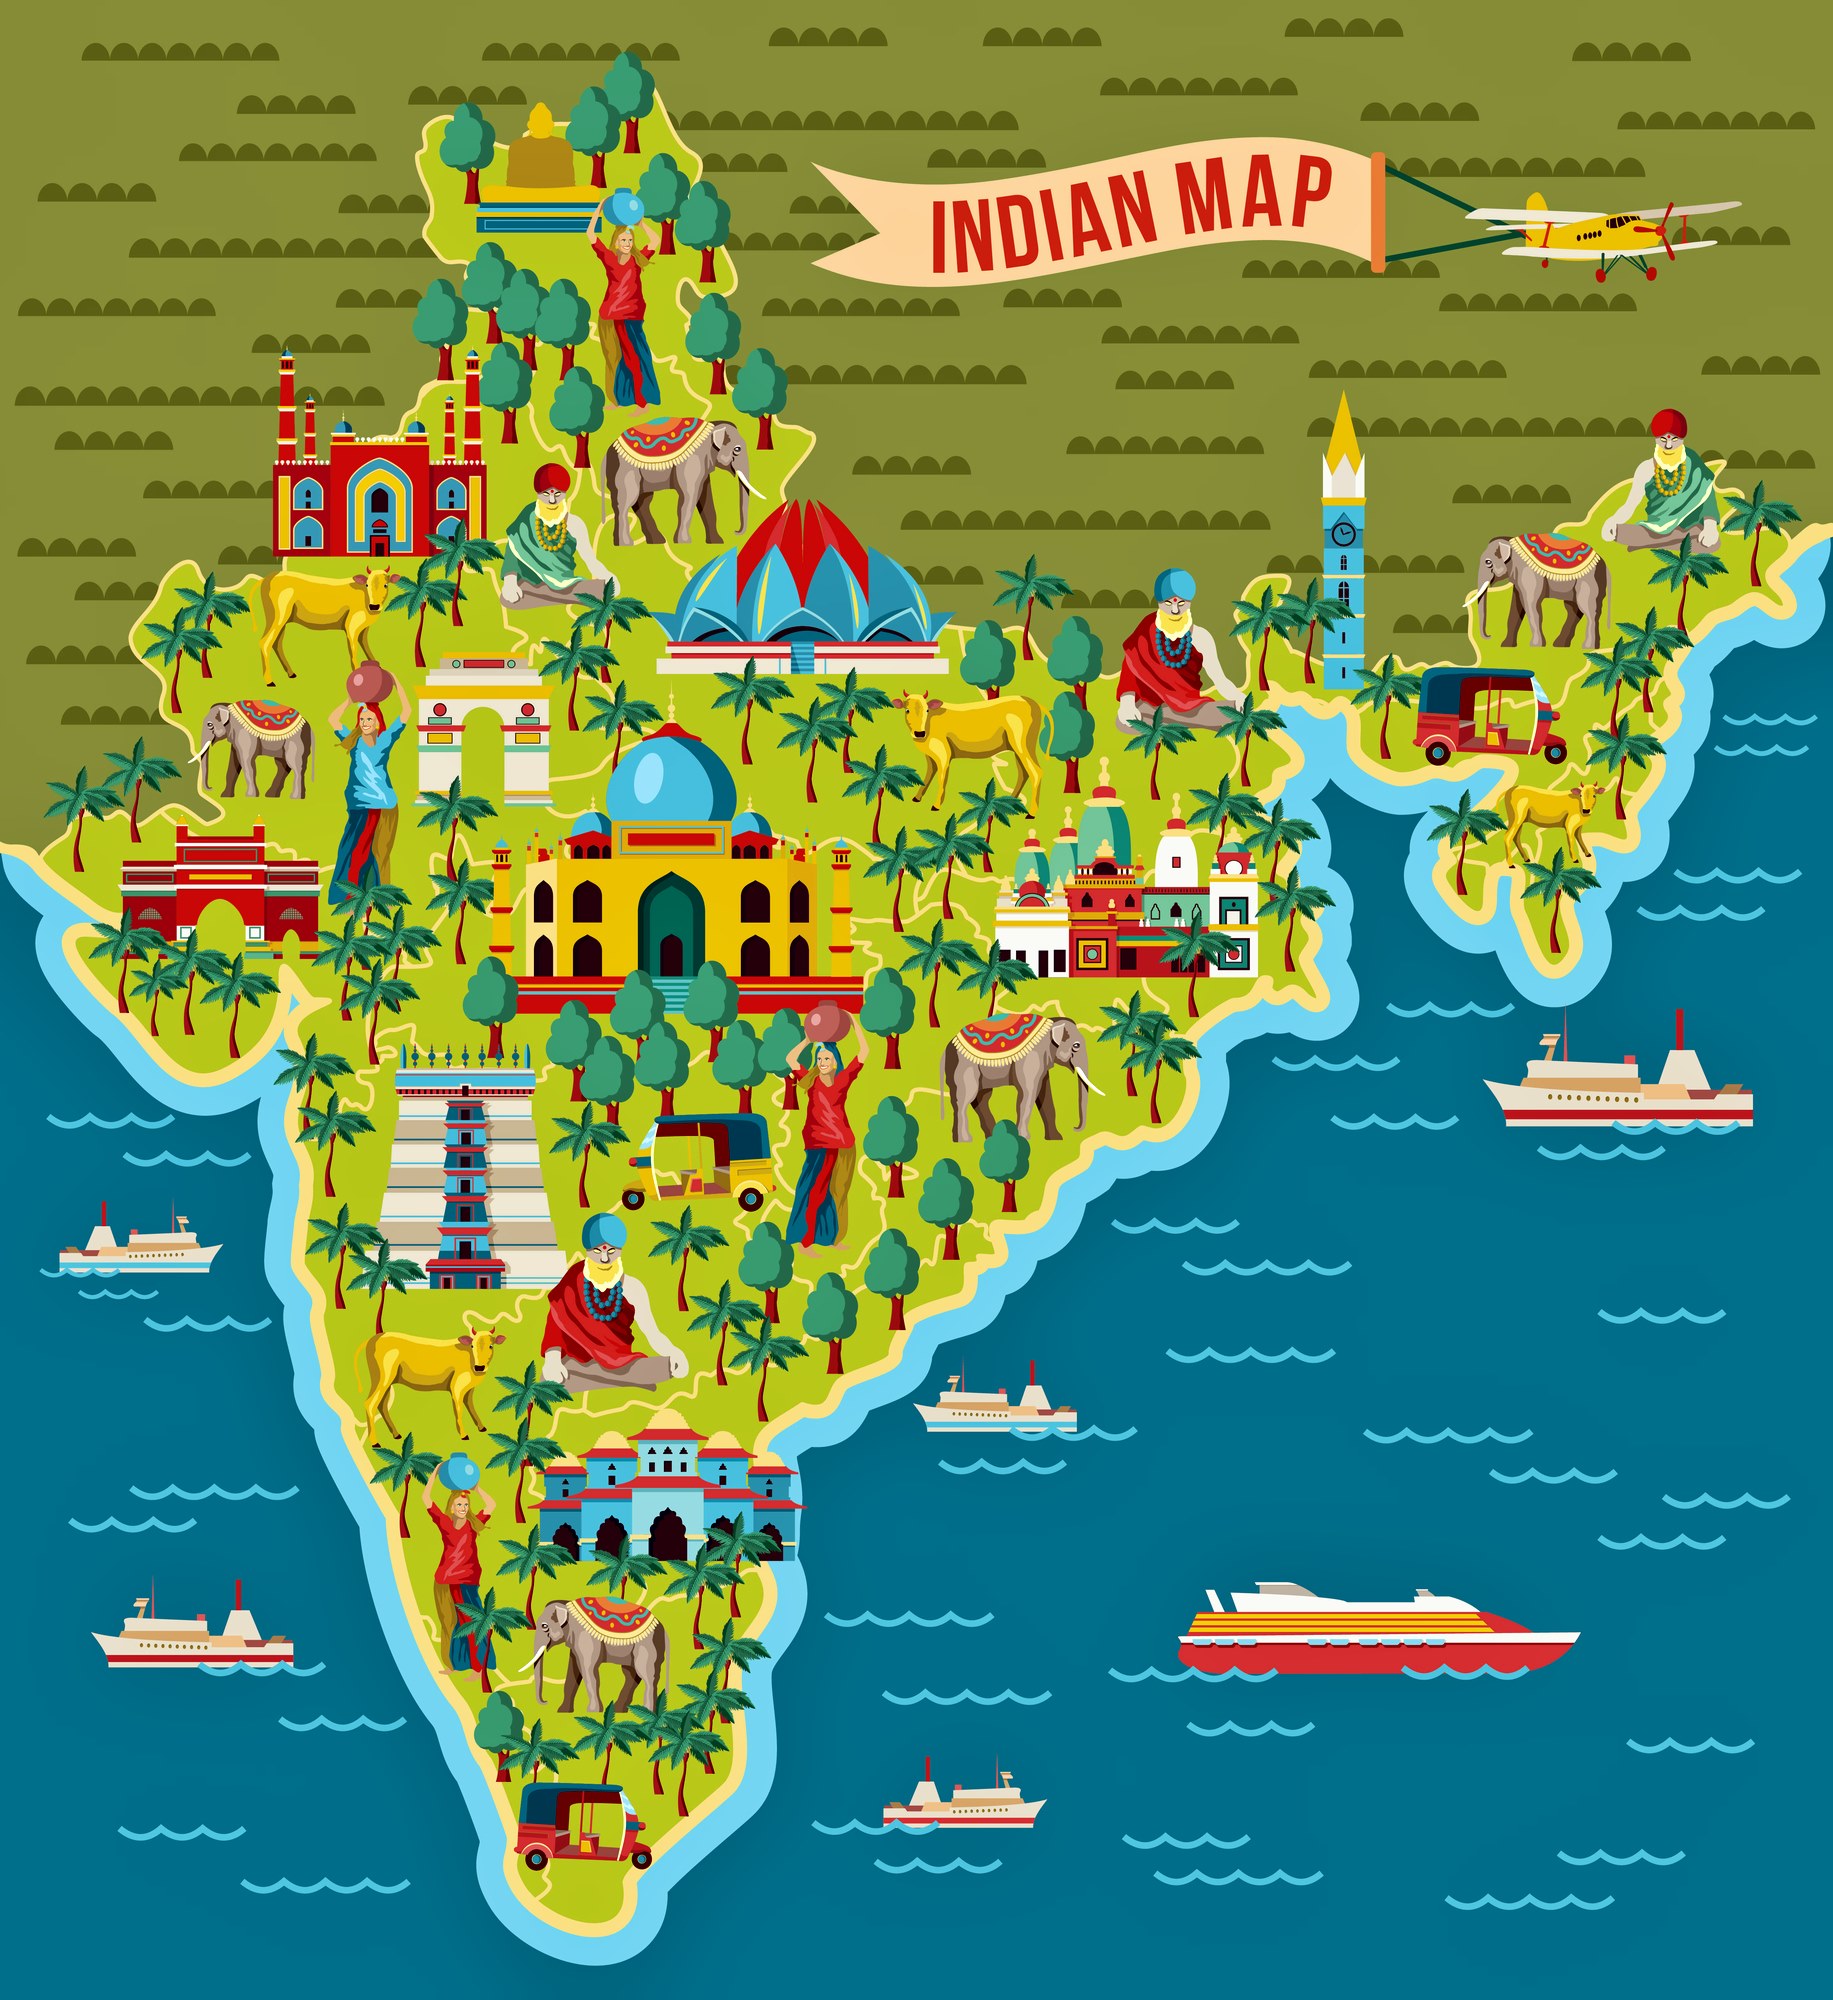 travel guide of india